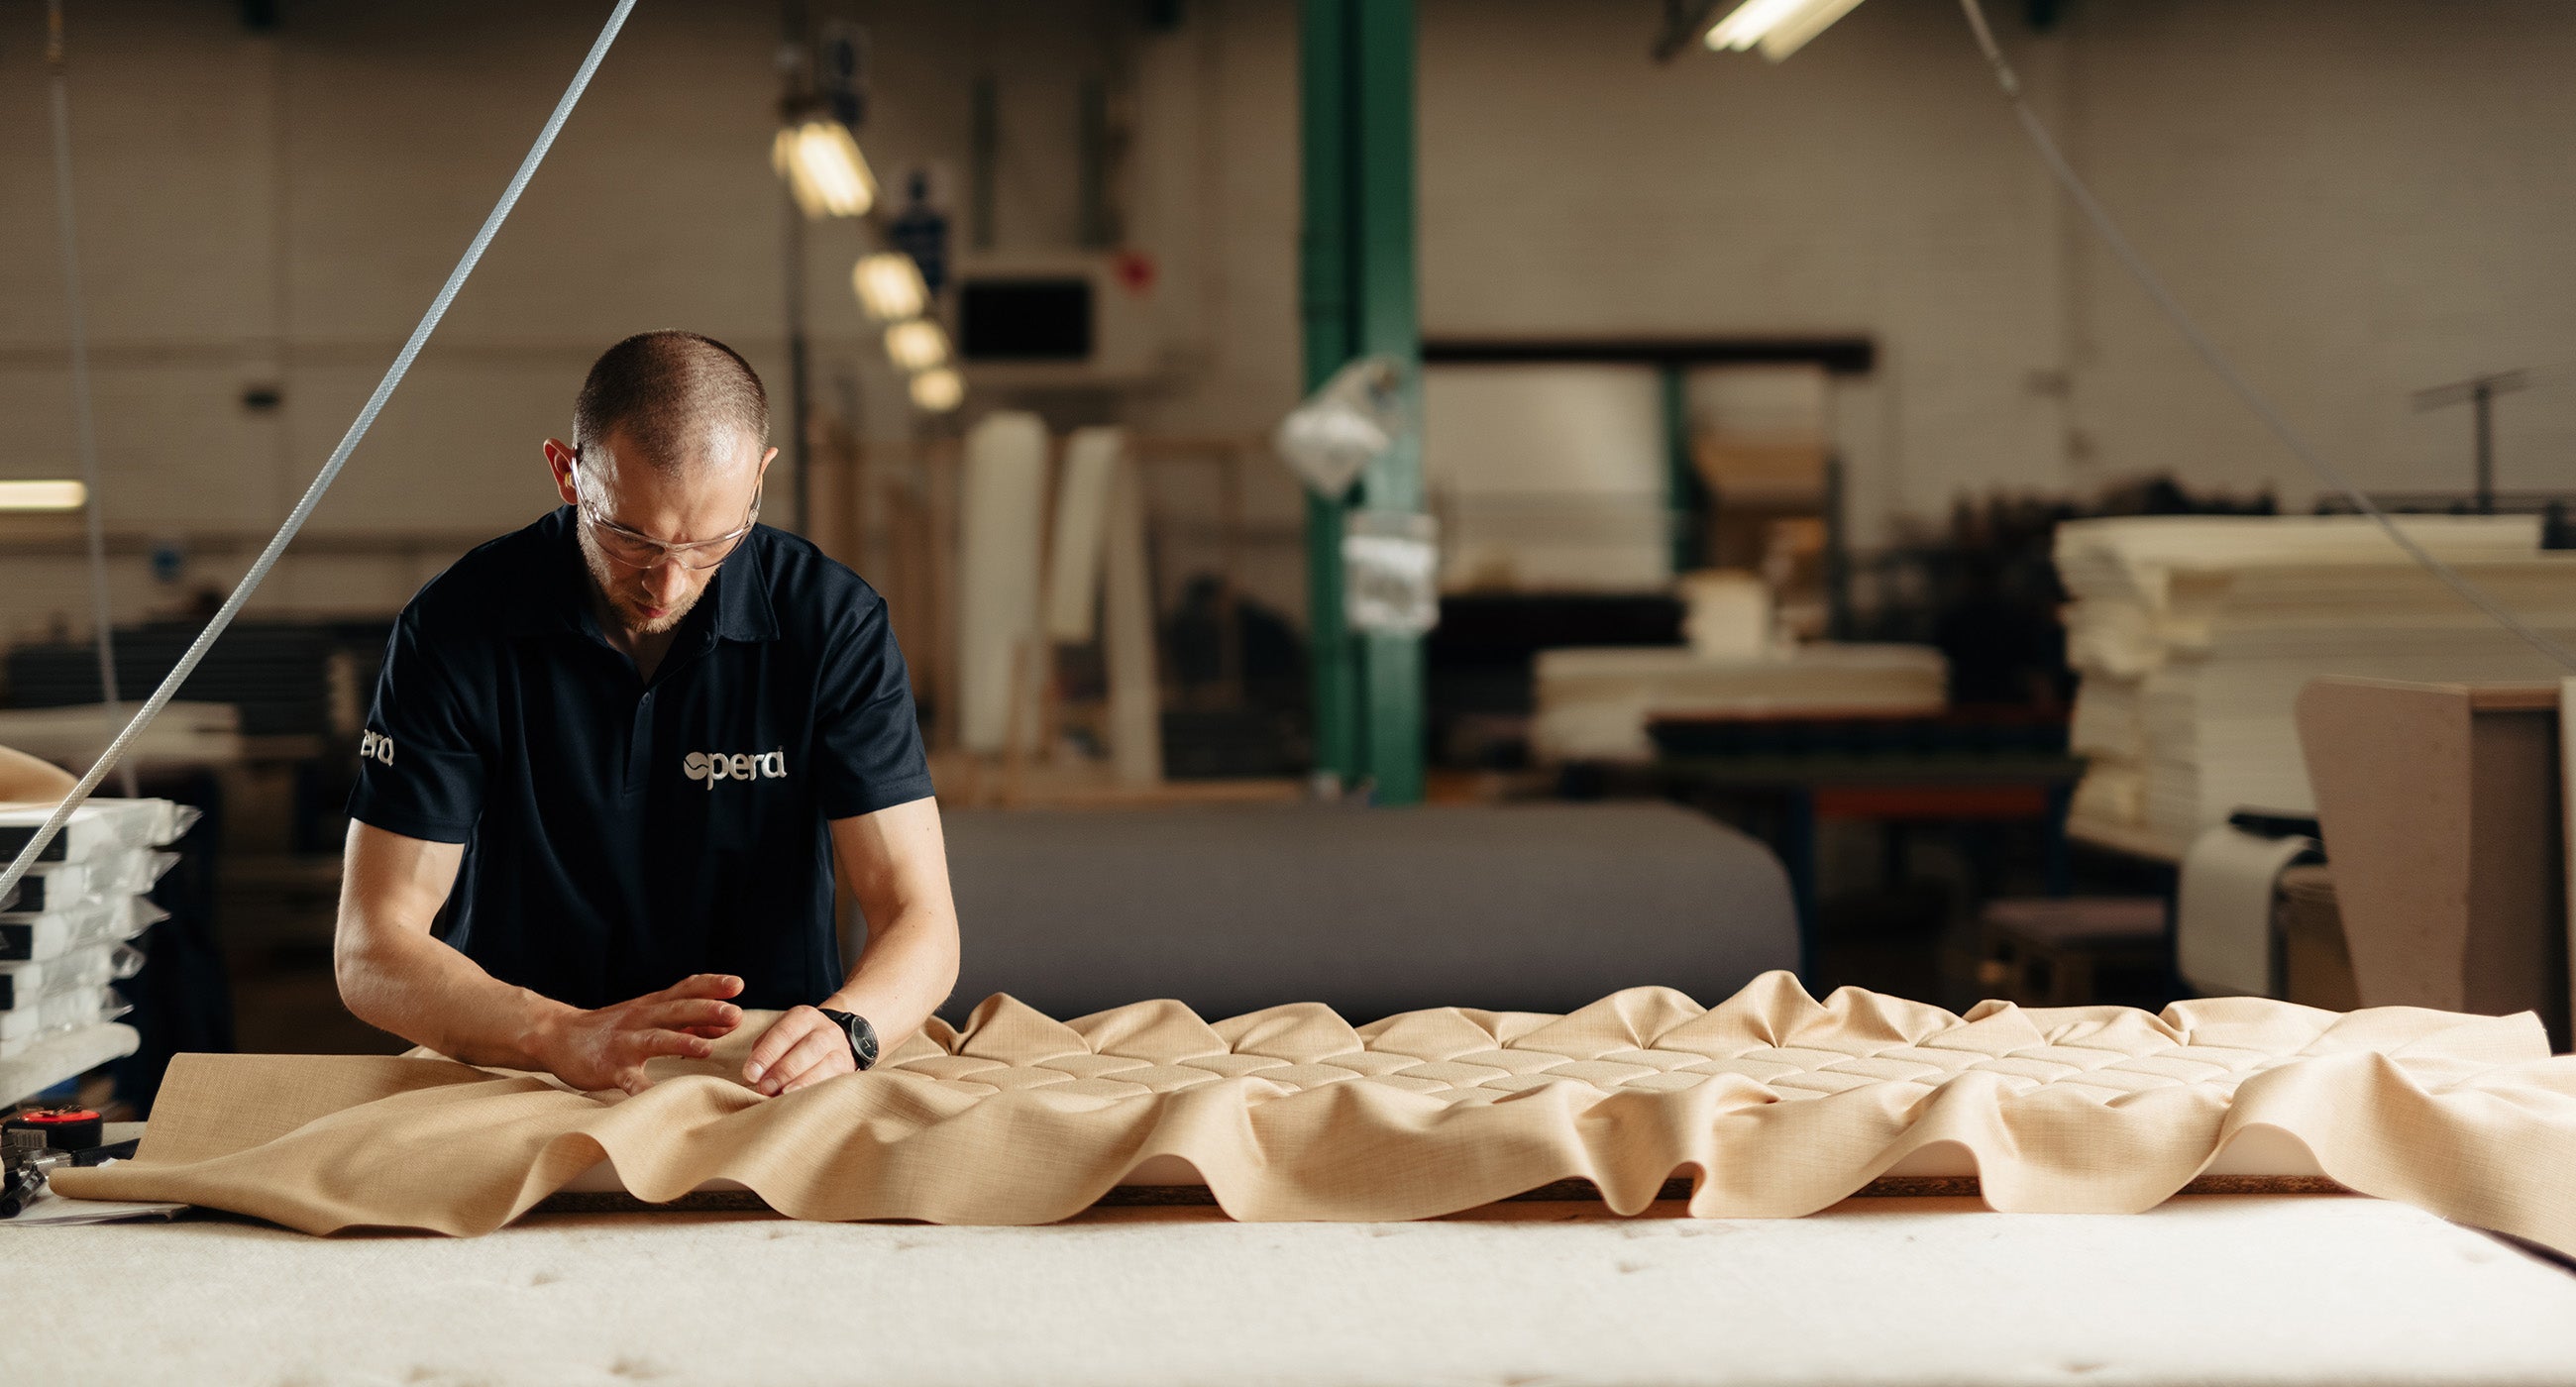 Opera Beds British Manufacturing video showing an Opera employee working with fabric